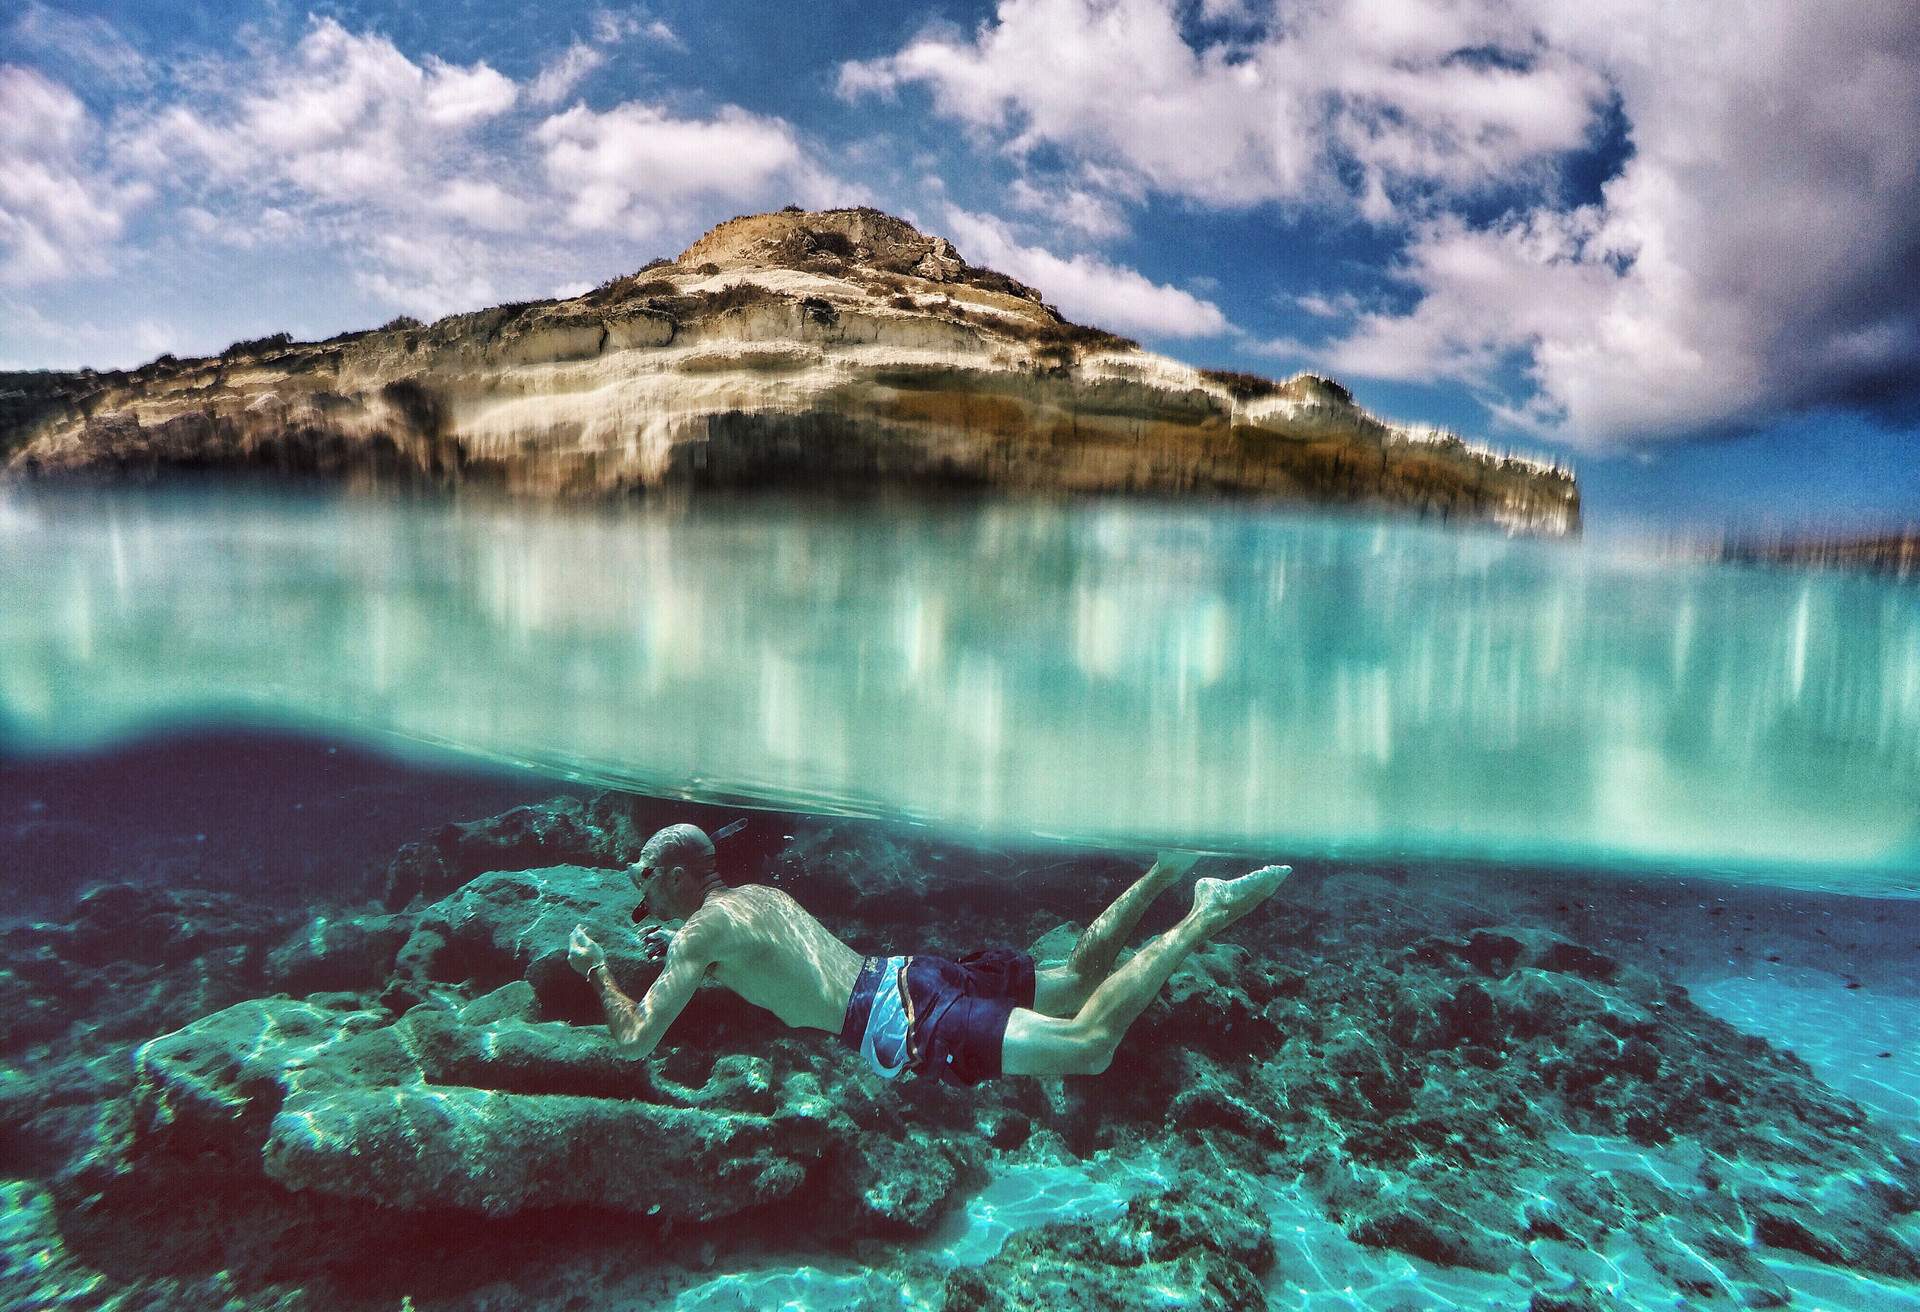 dest_italy_sicily_lampedusa_theme_snorkelling_diving_gettyimages